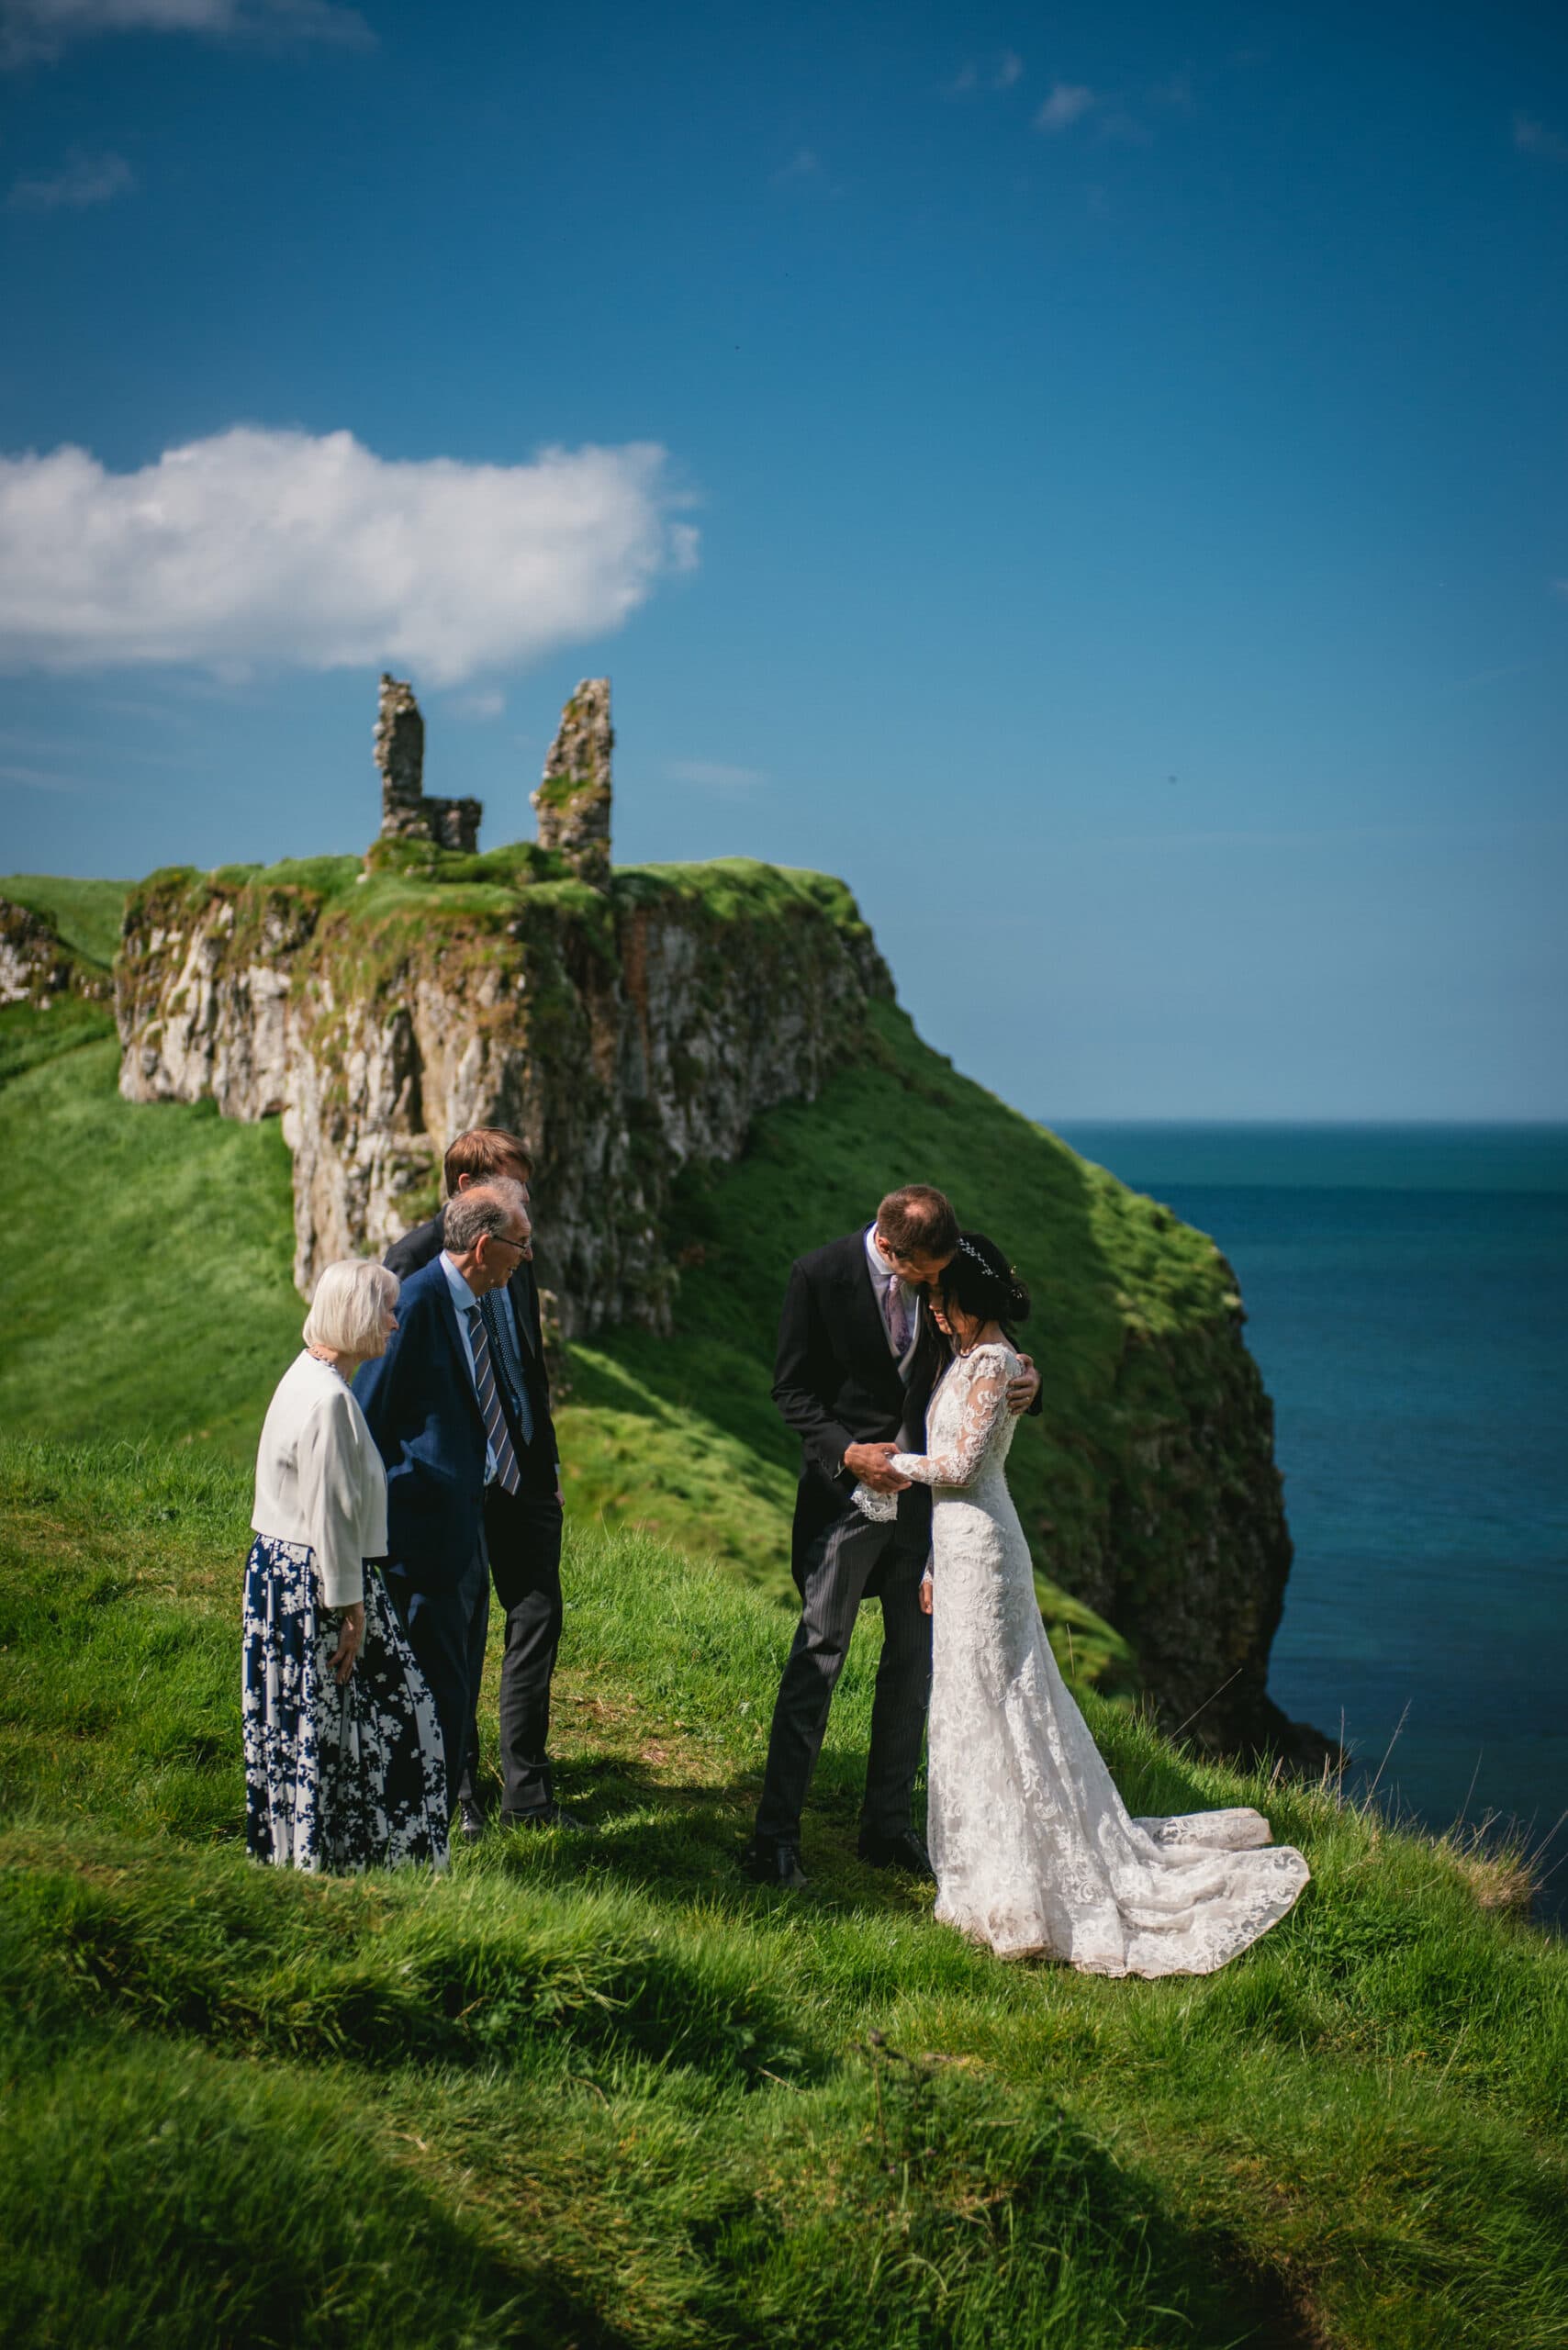 Glimpse of the couple's intimate wedding ceremony at Dunseverick castle during their Northern Ireland elopement.